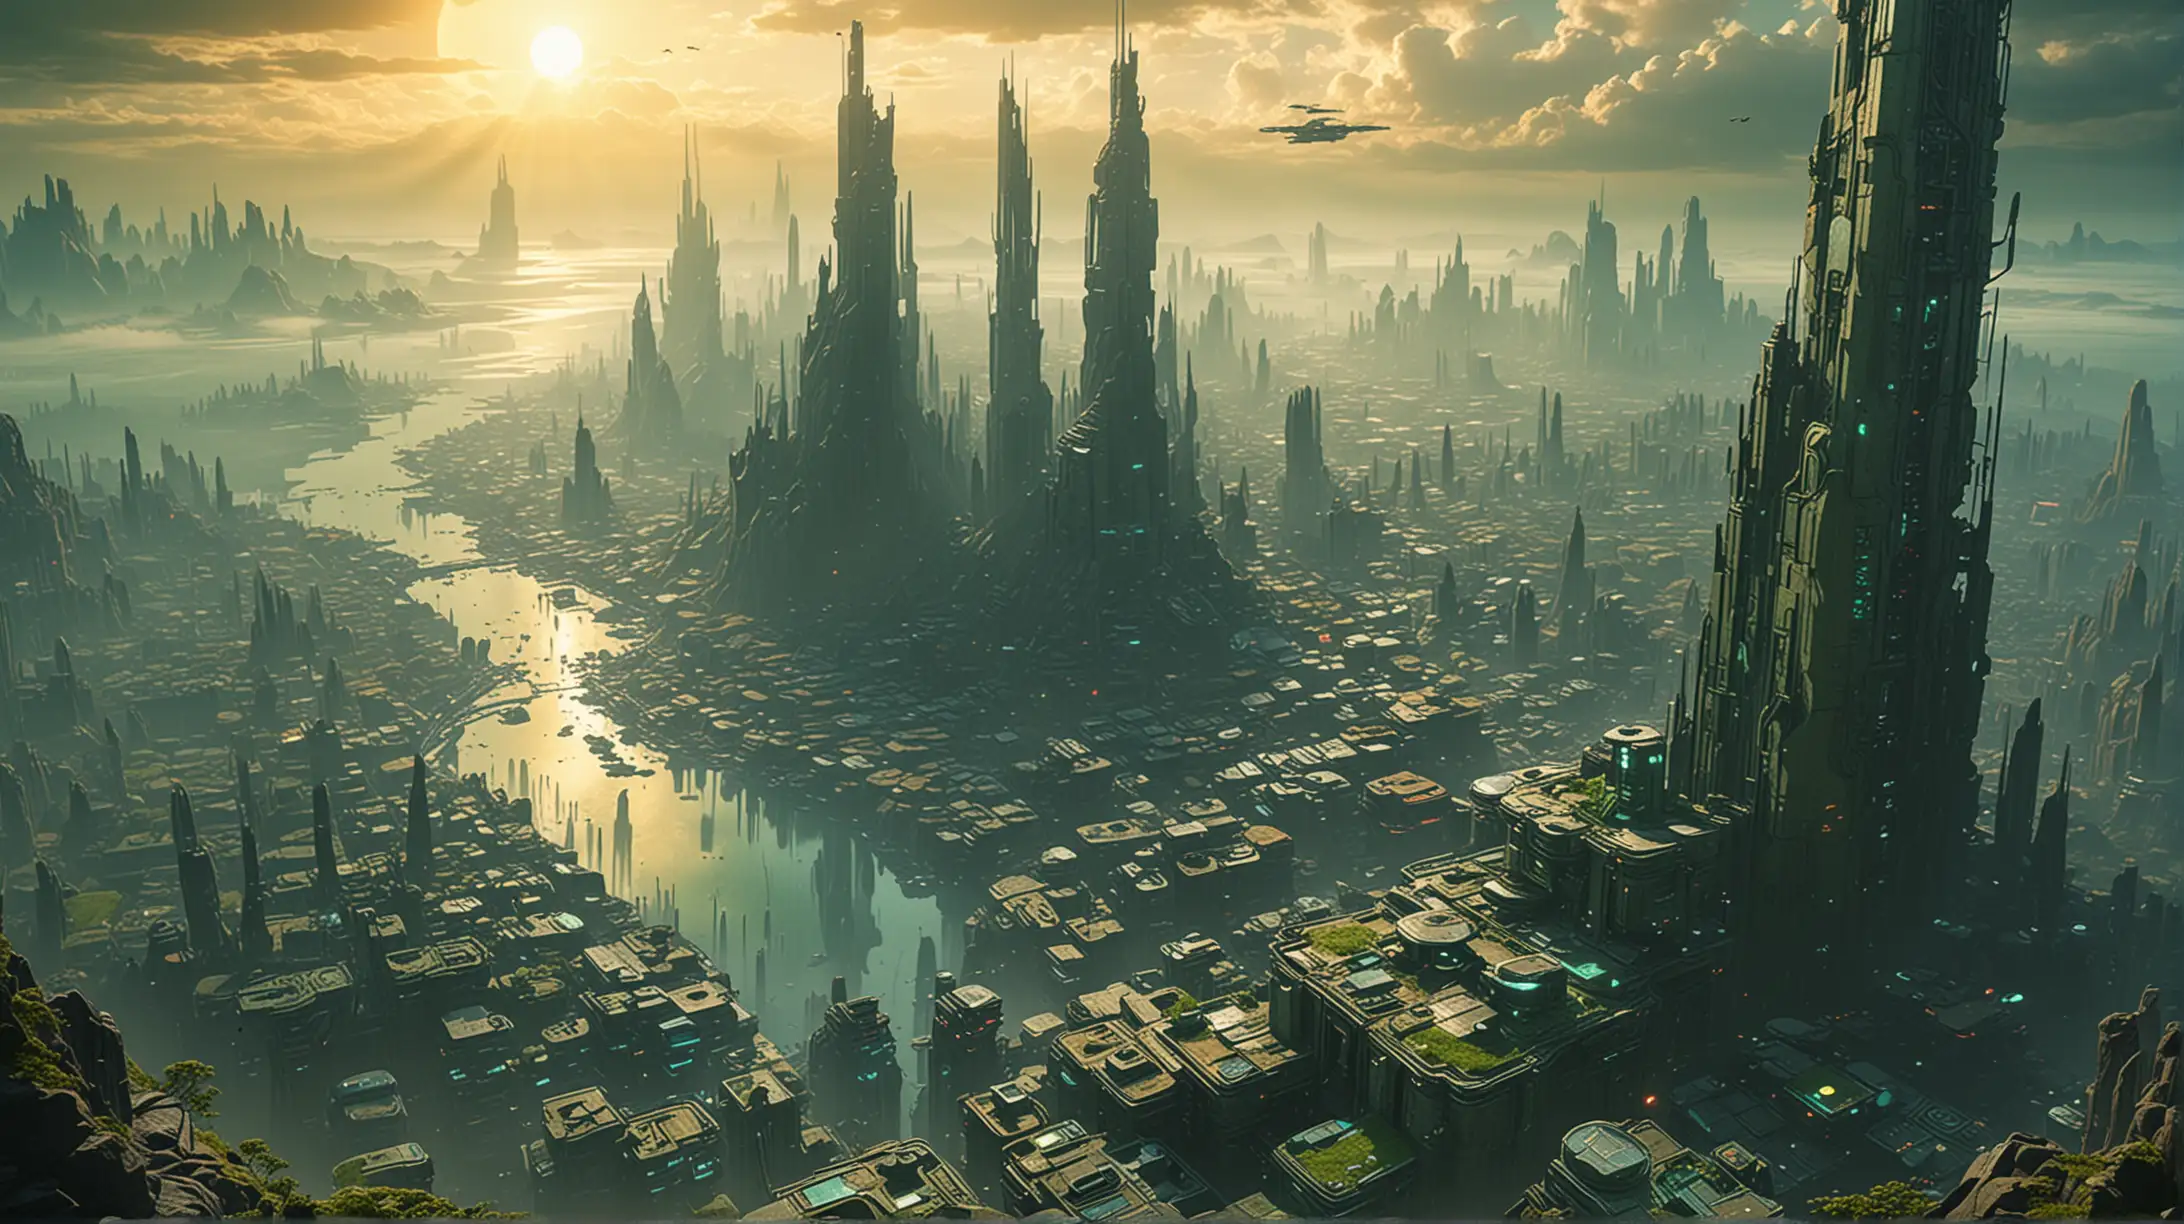 a cyberpunk city made of stone, glass and steel on a distant planet, big sun, light green atmosphere, fog, bright colors, bird's eye view